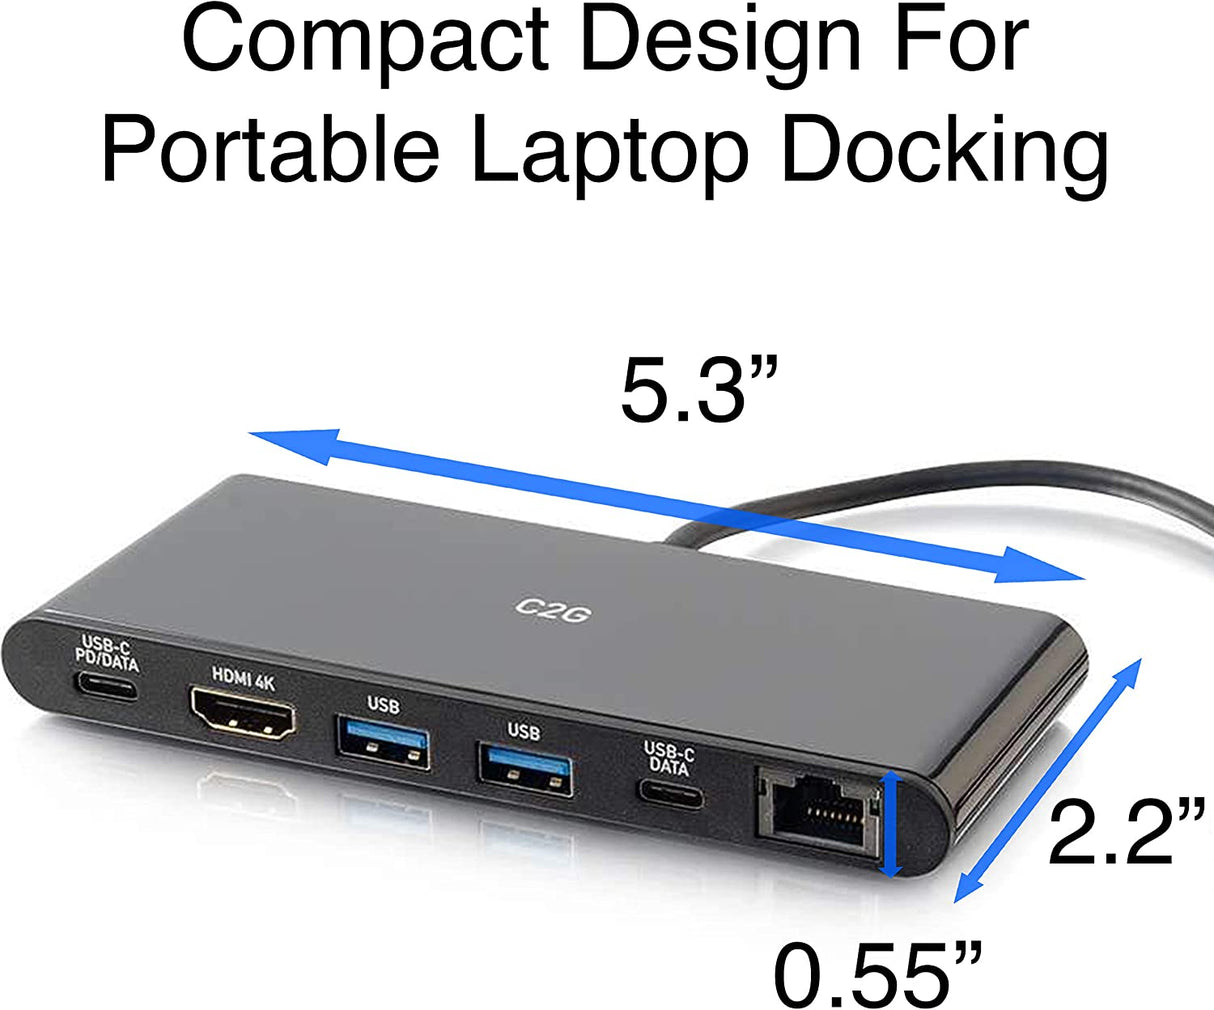 C2g/ cables to go C2G Docking Station, USB C Docking Station, 4K Docking Station, Compatible with USB-C &amp; Thunderbolt 3 Laptops, Black, Cables to Go 28845